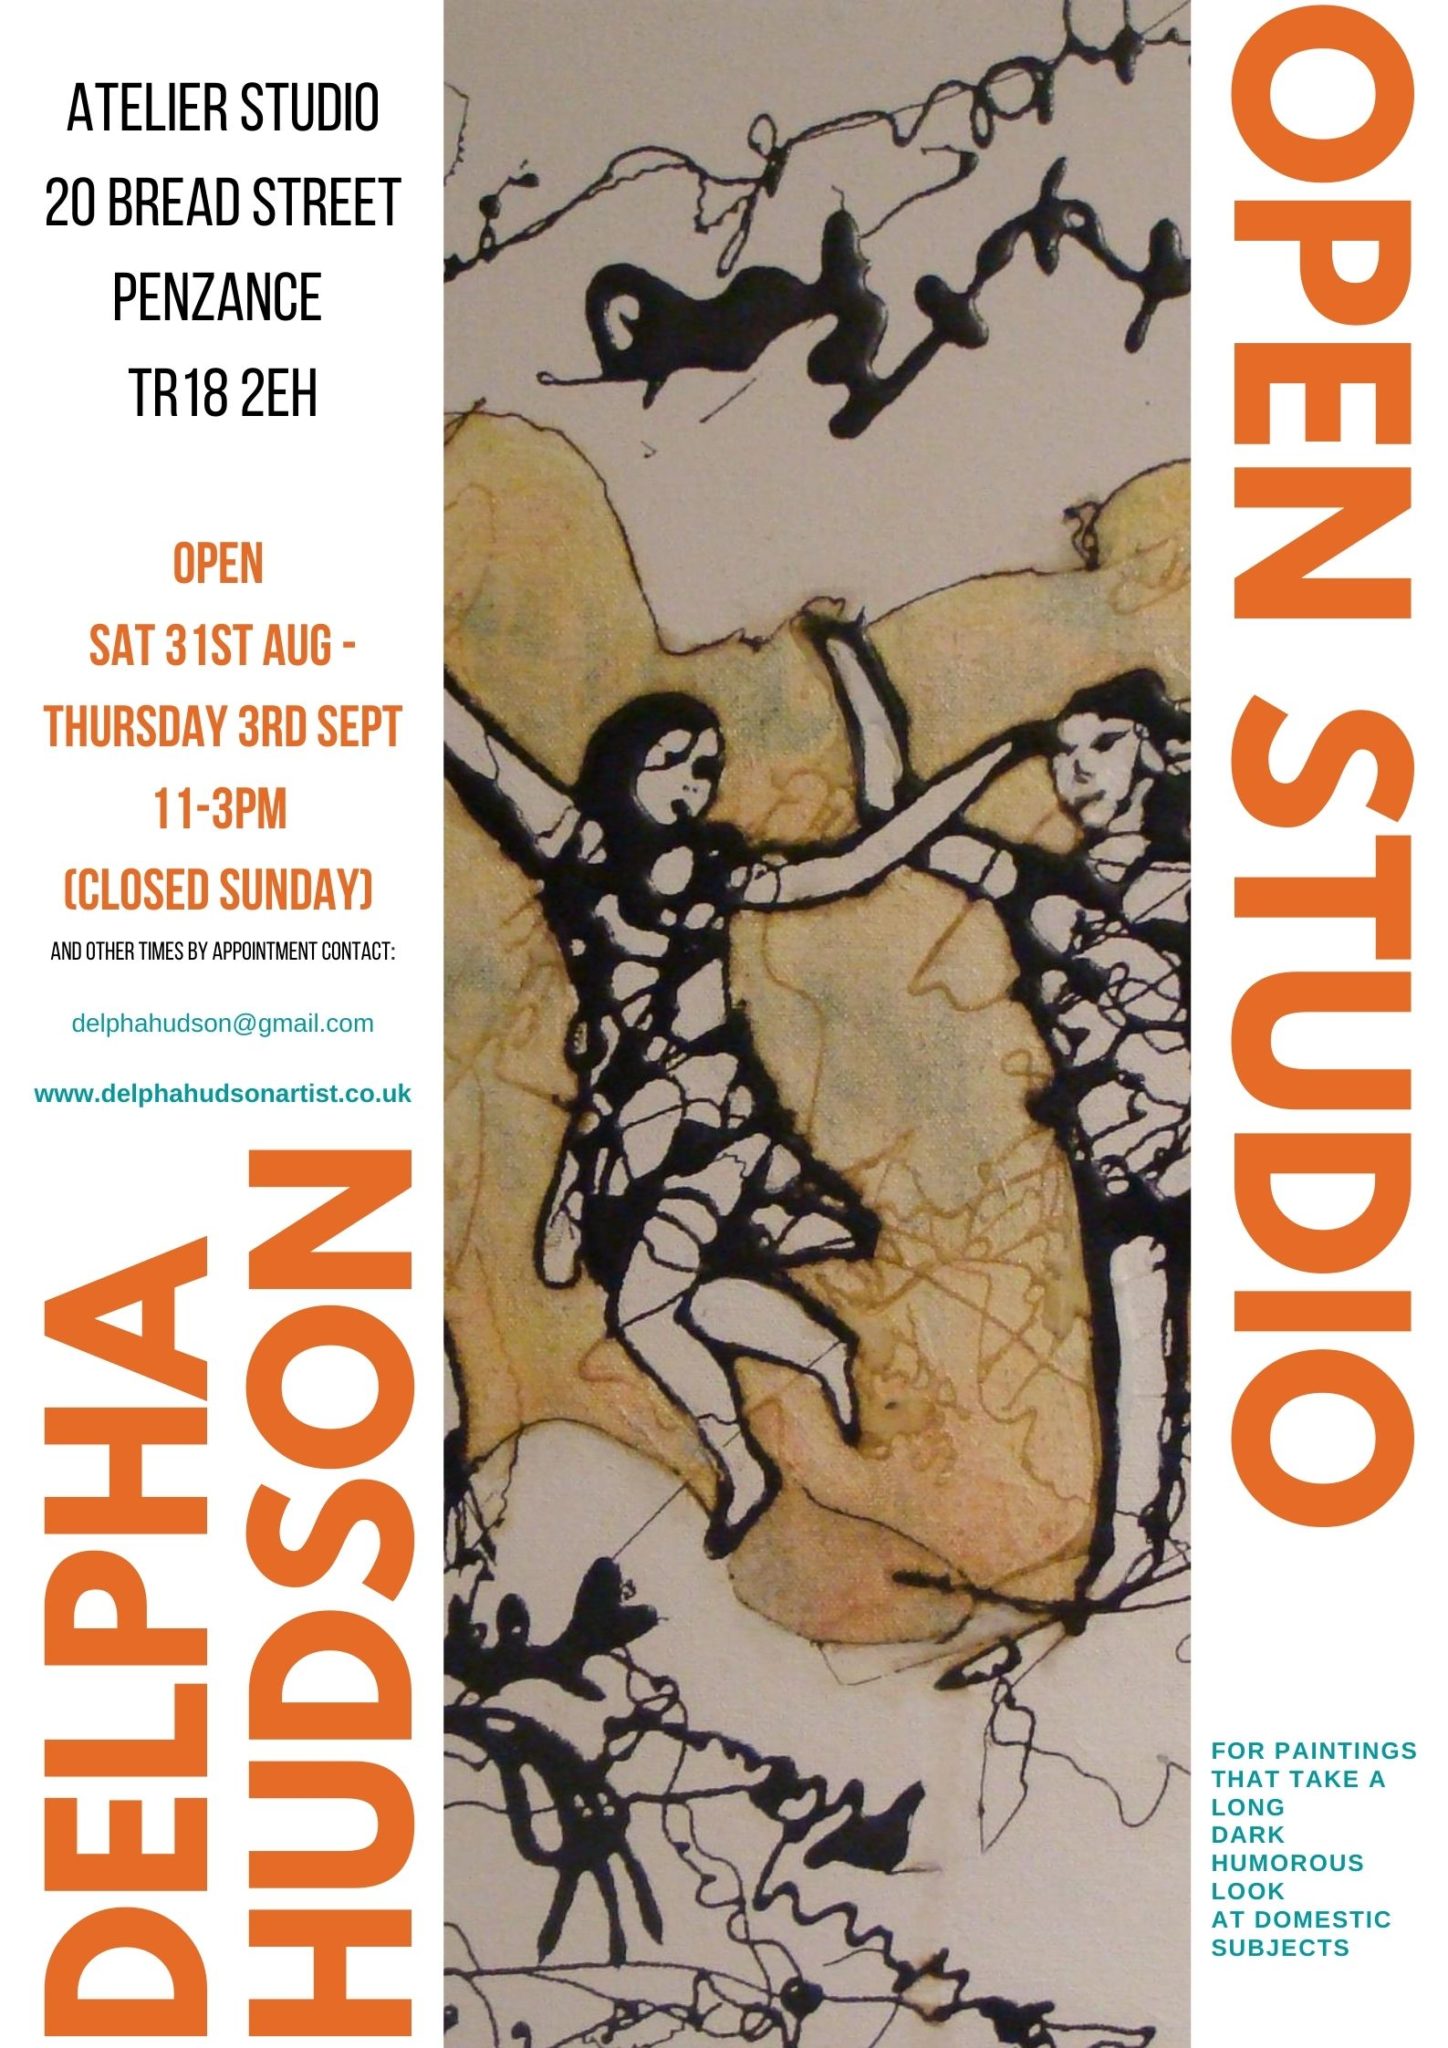 Open Studio – come and see new painting